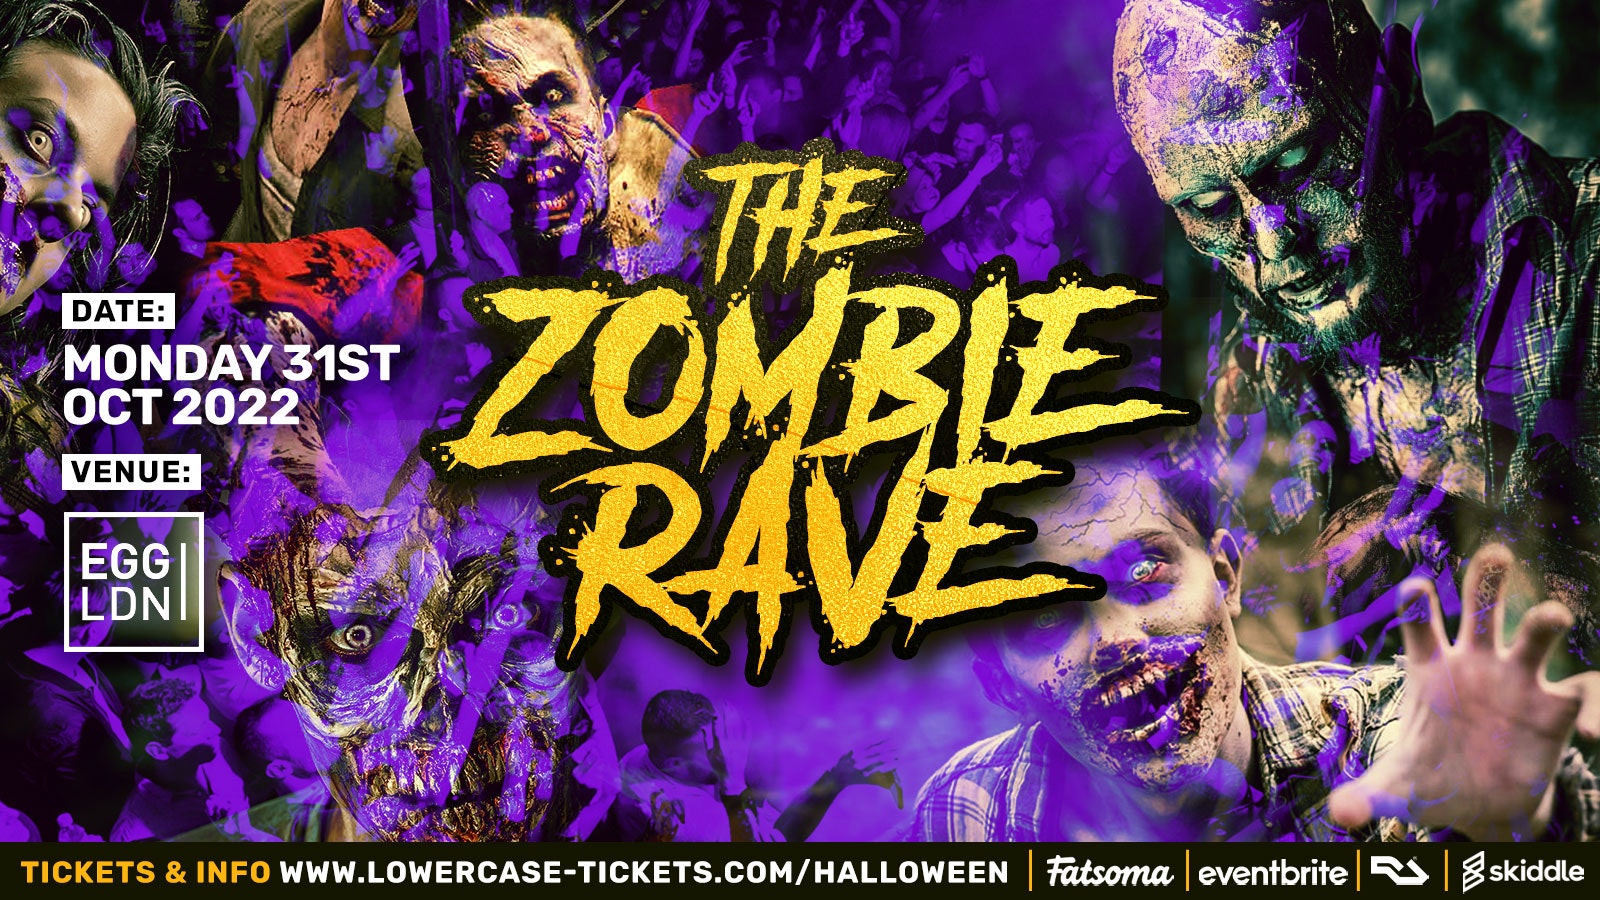 HALLOWEEN 2022 AT EGG LONDON! THE ZOMBIE RAVE ALL NIGHTER!